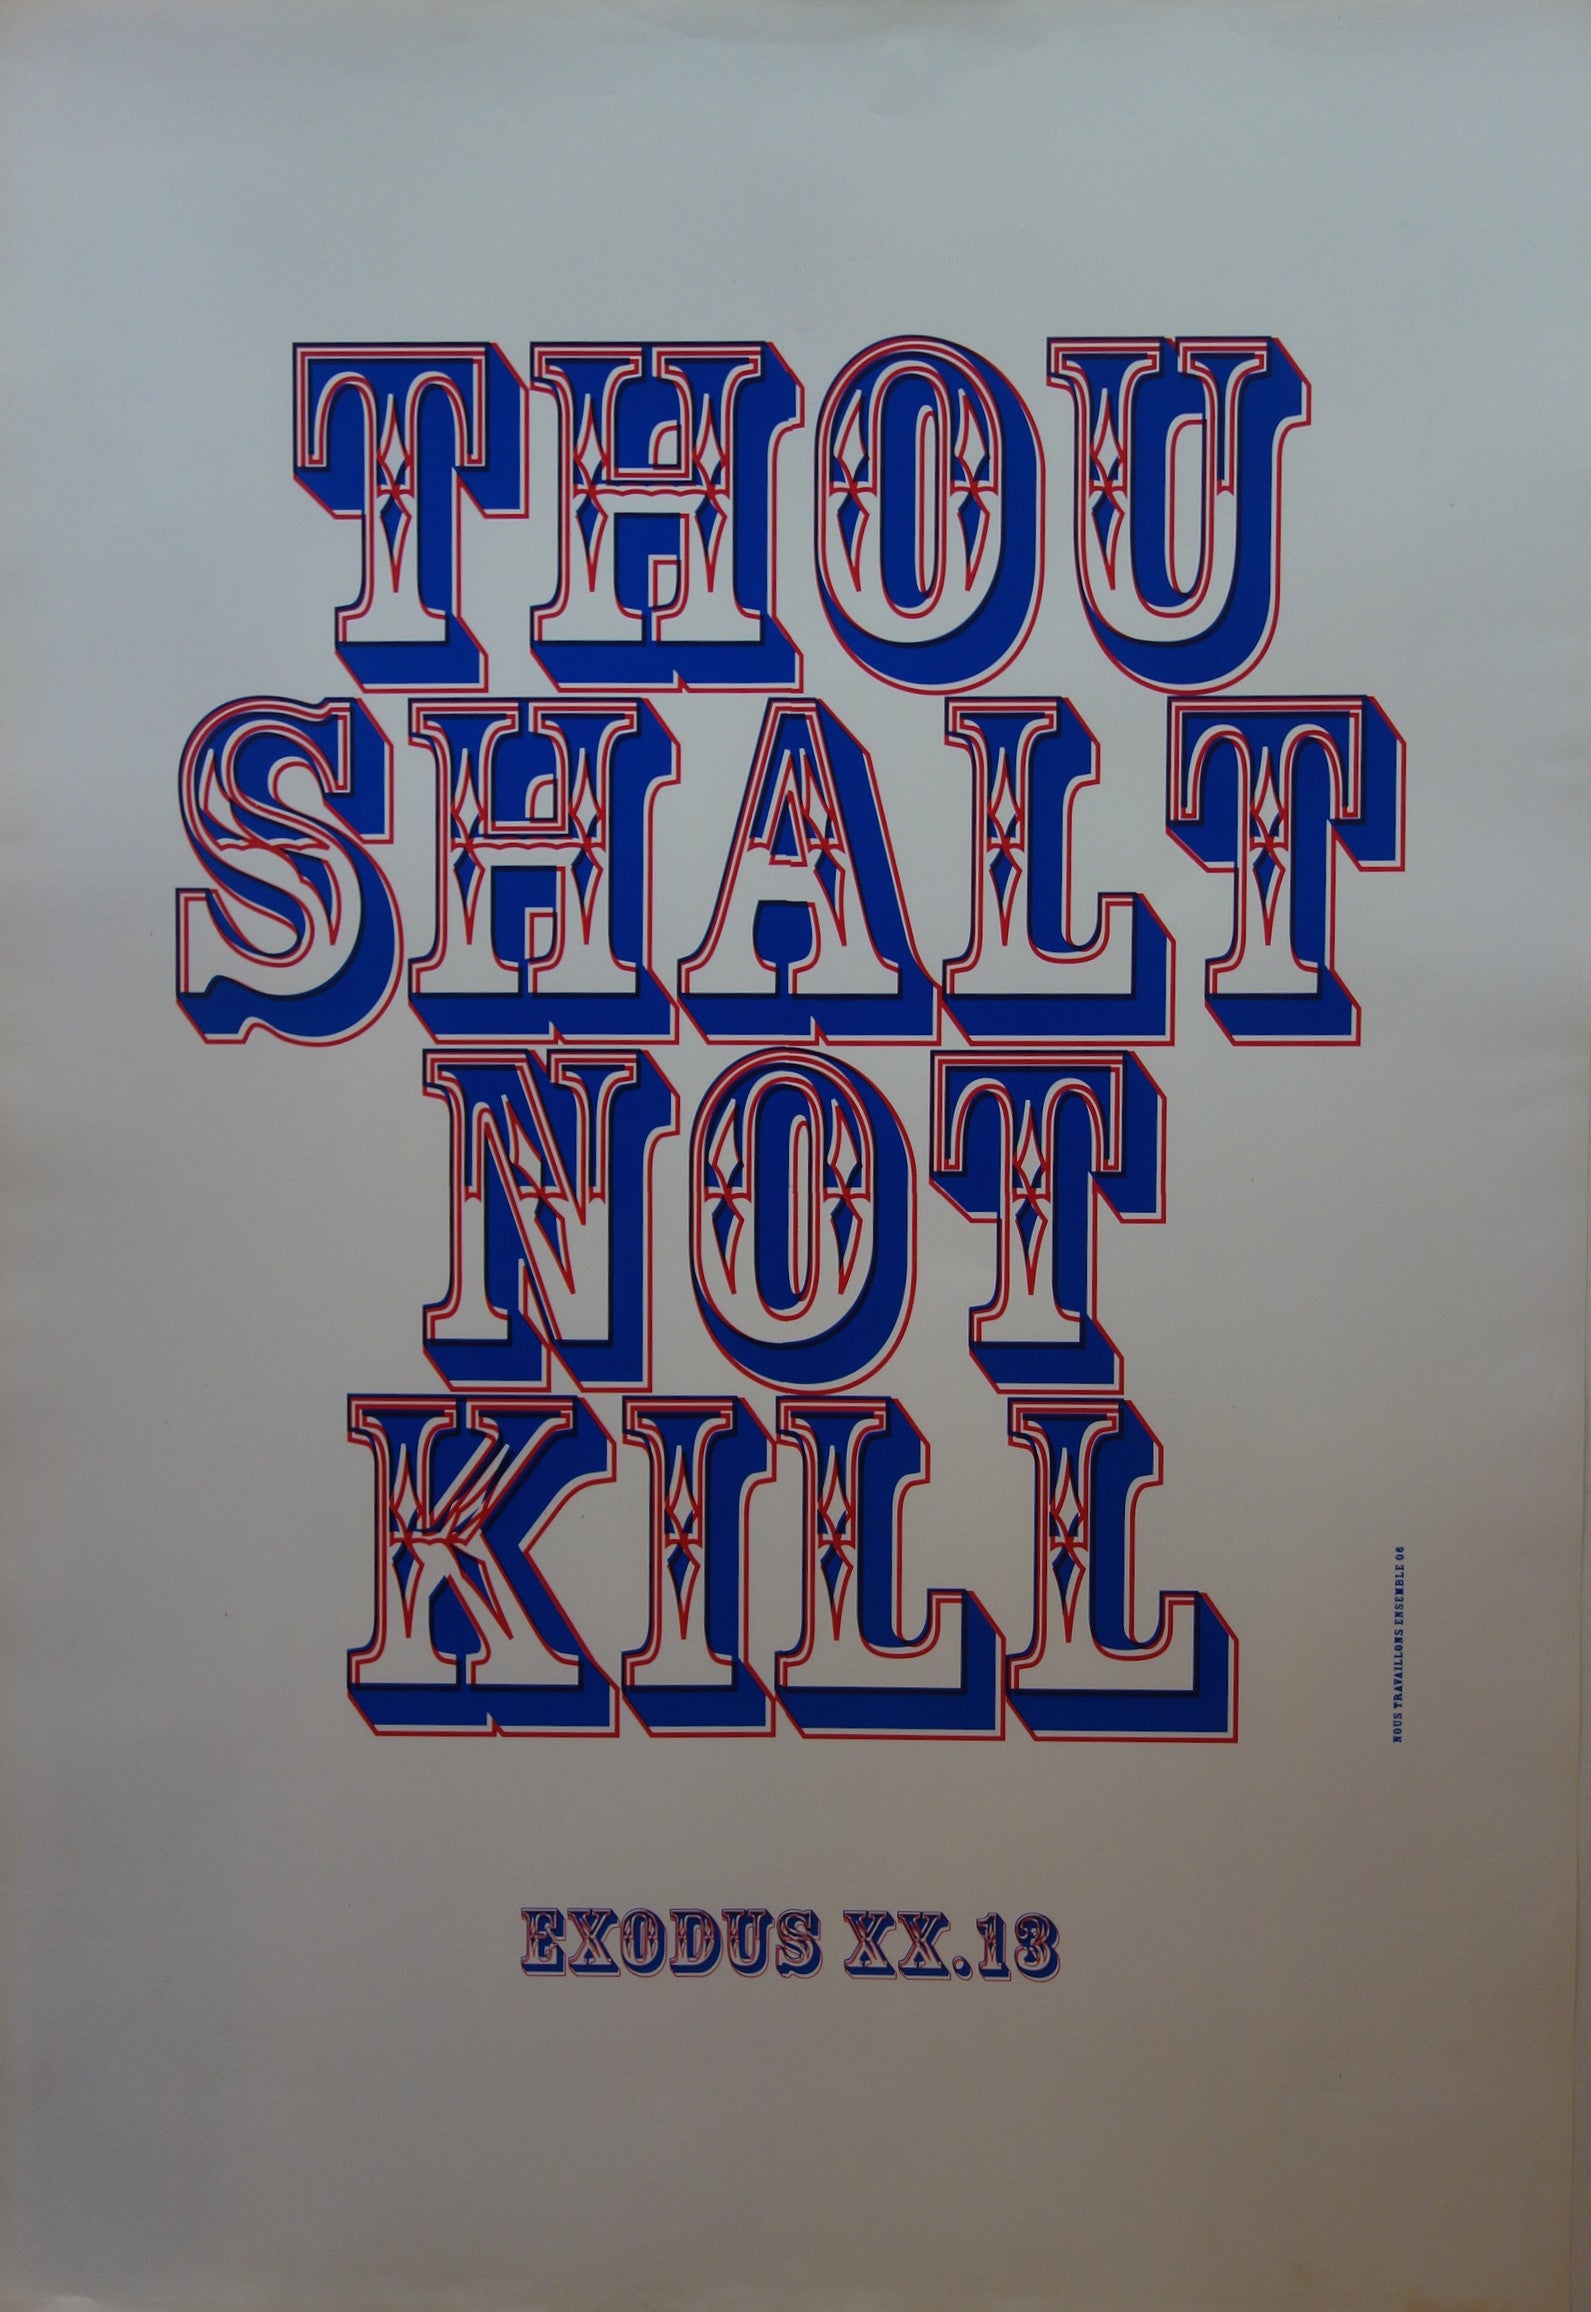 thou shalt not kill bible quote